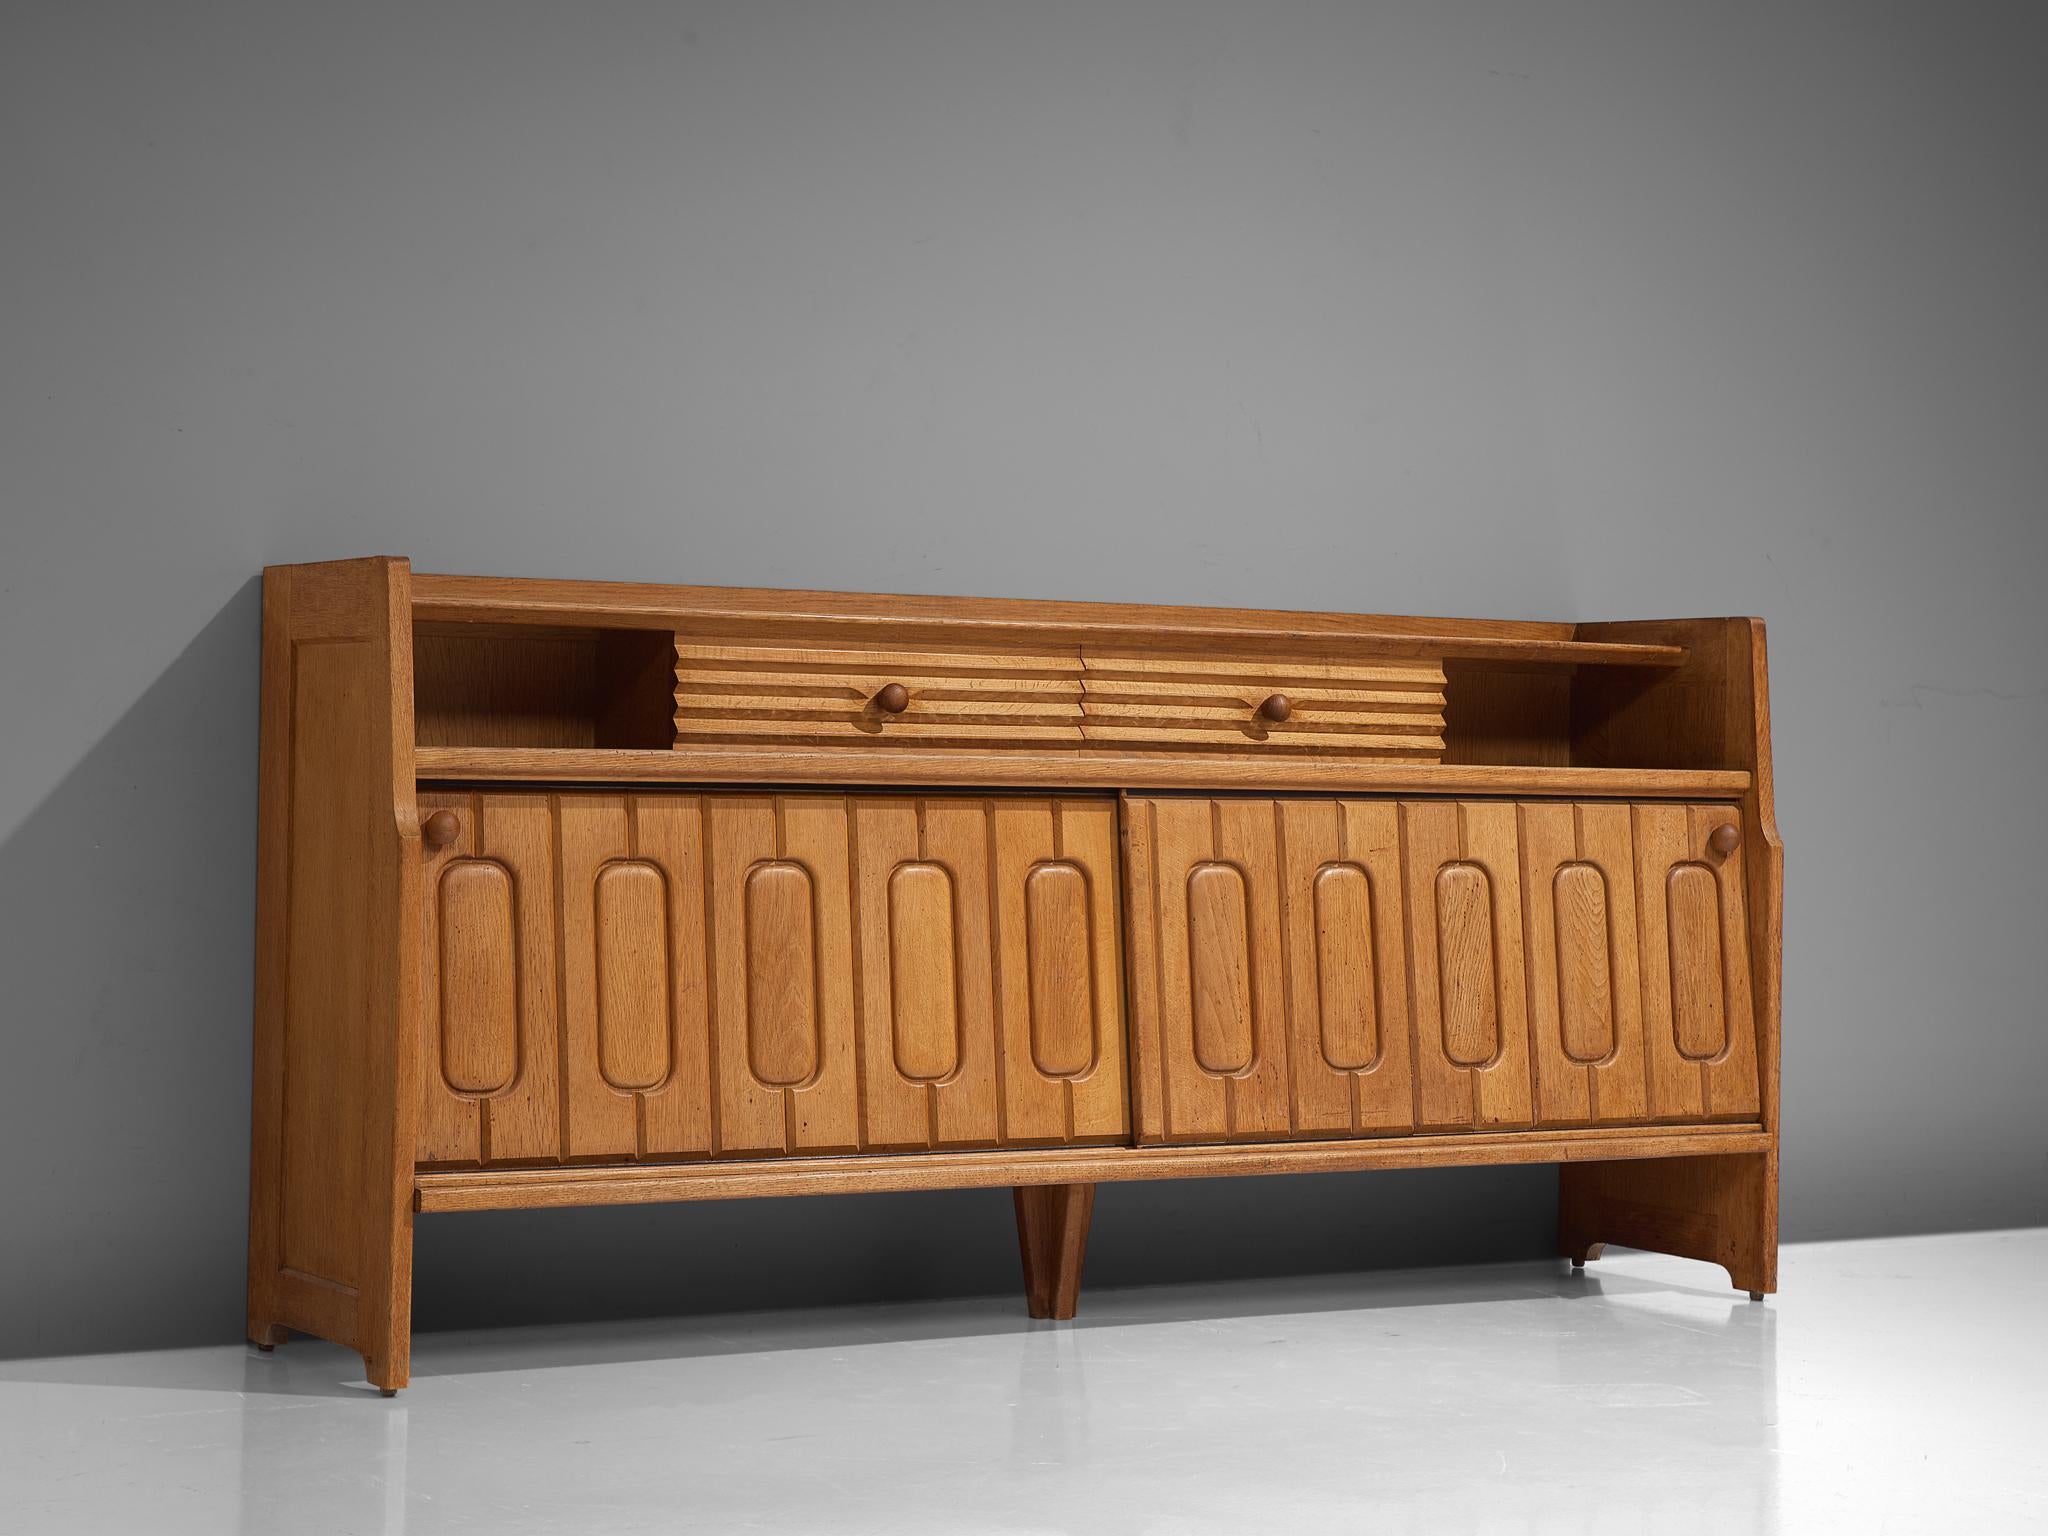 Guillerme & Chambron Sideboard in Oak and Ceramic